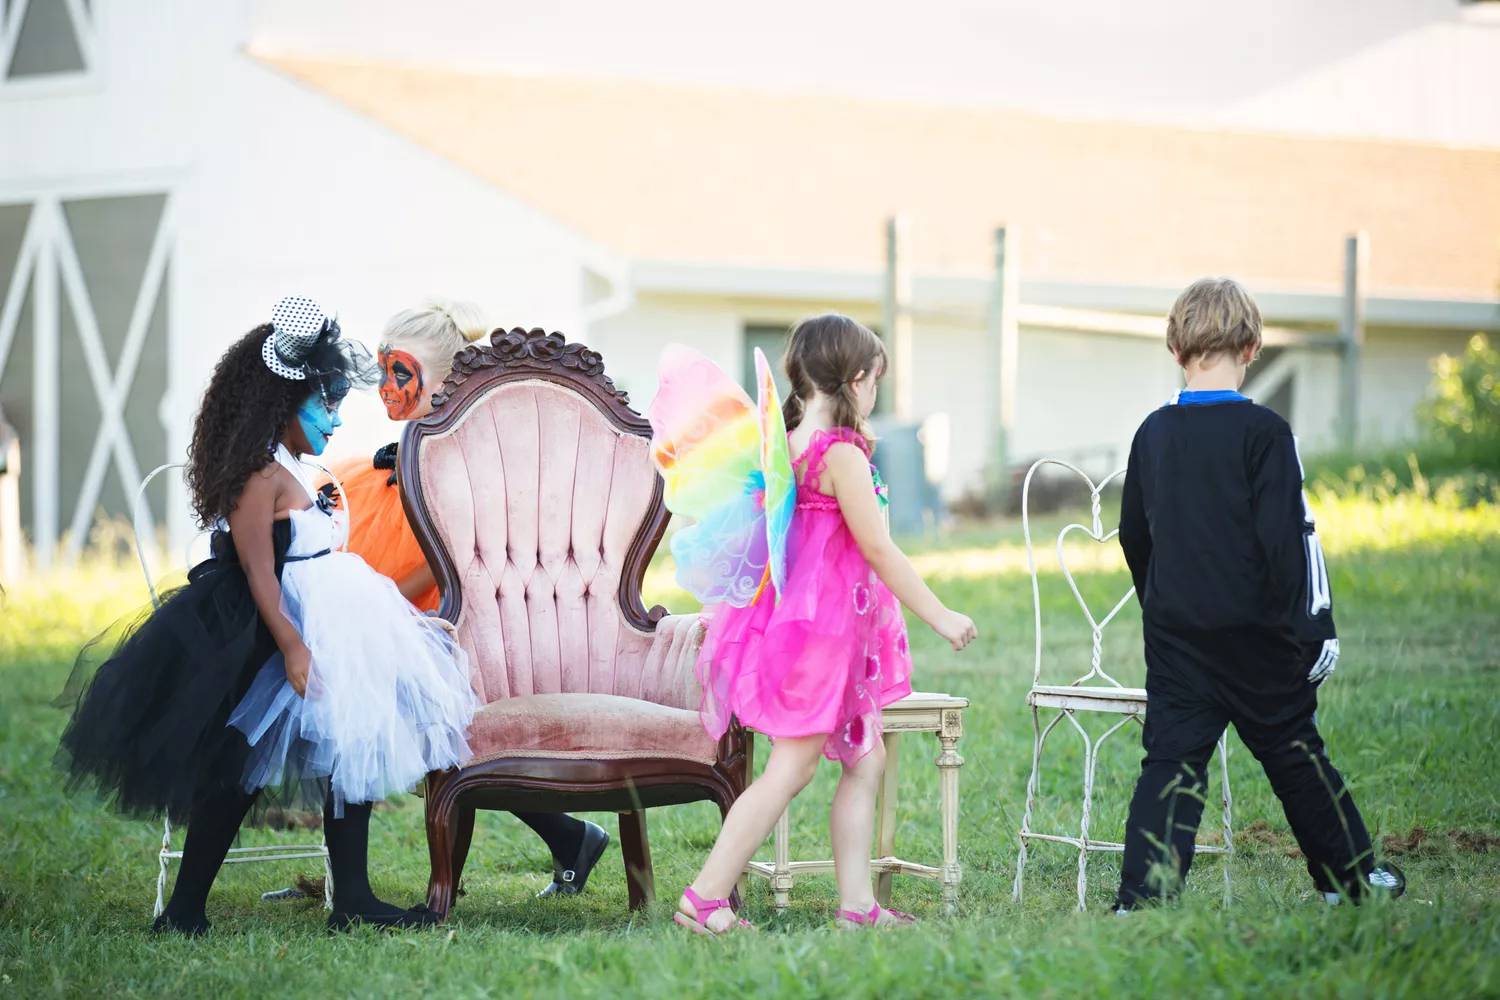 Ghostly Freeze Dance Halloween party games